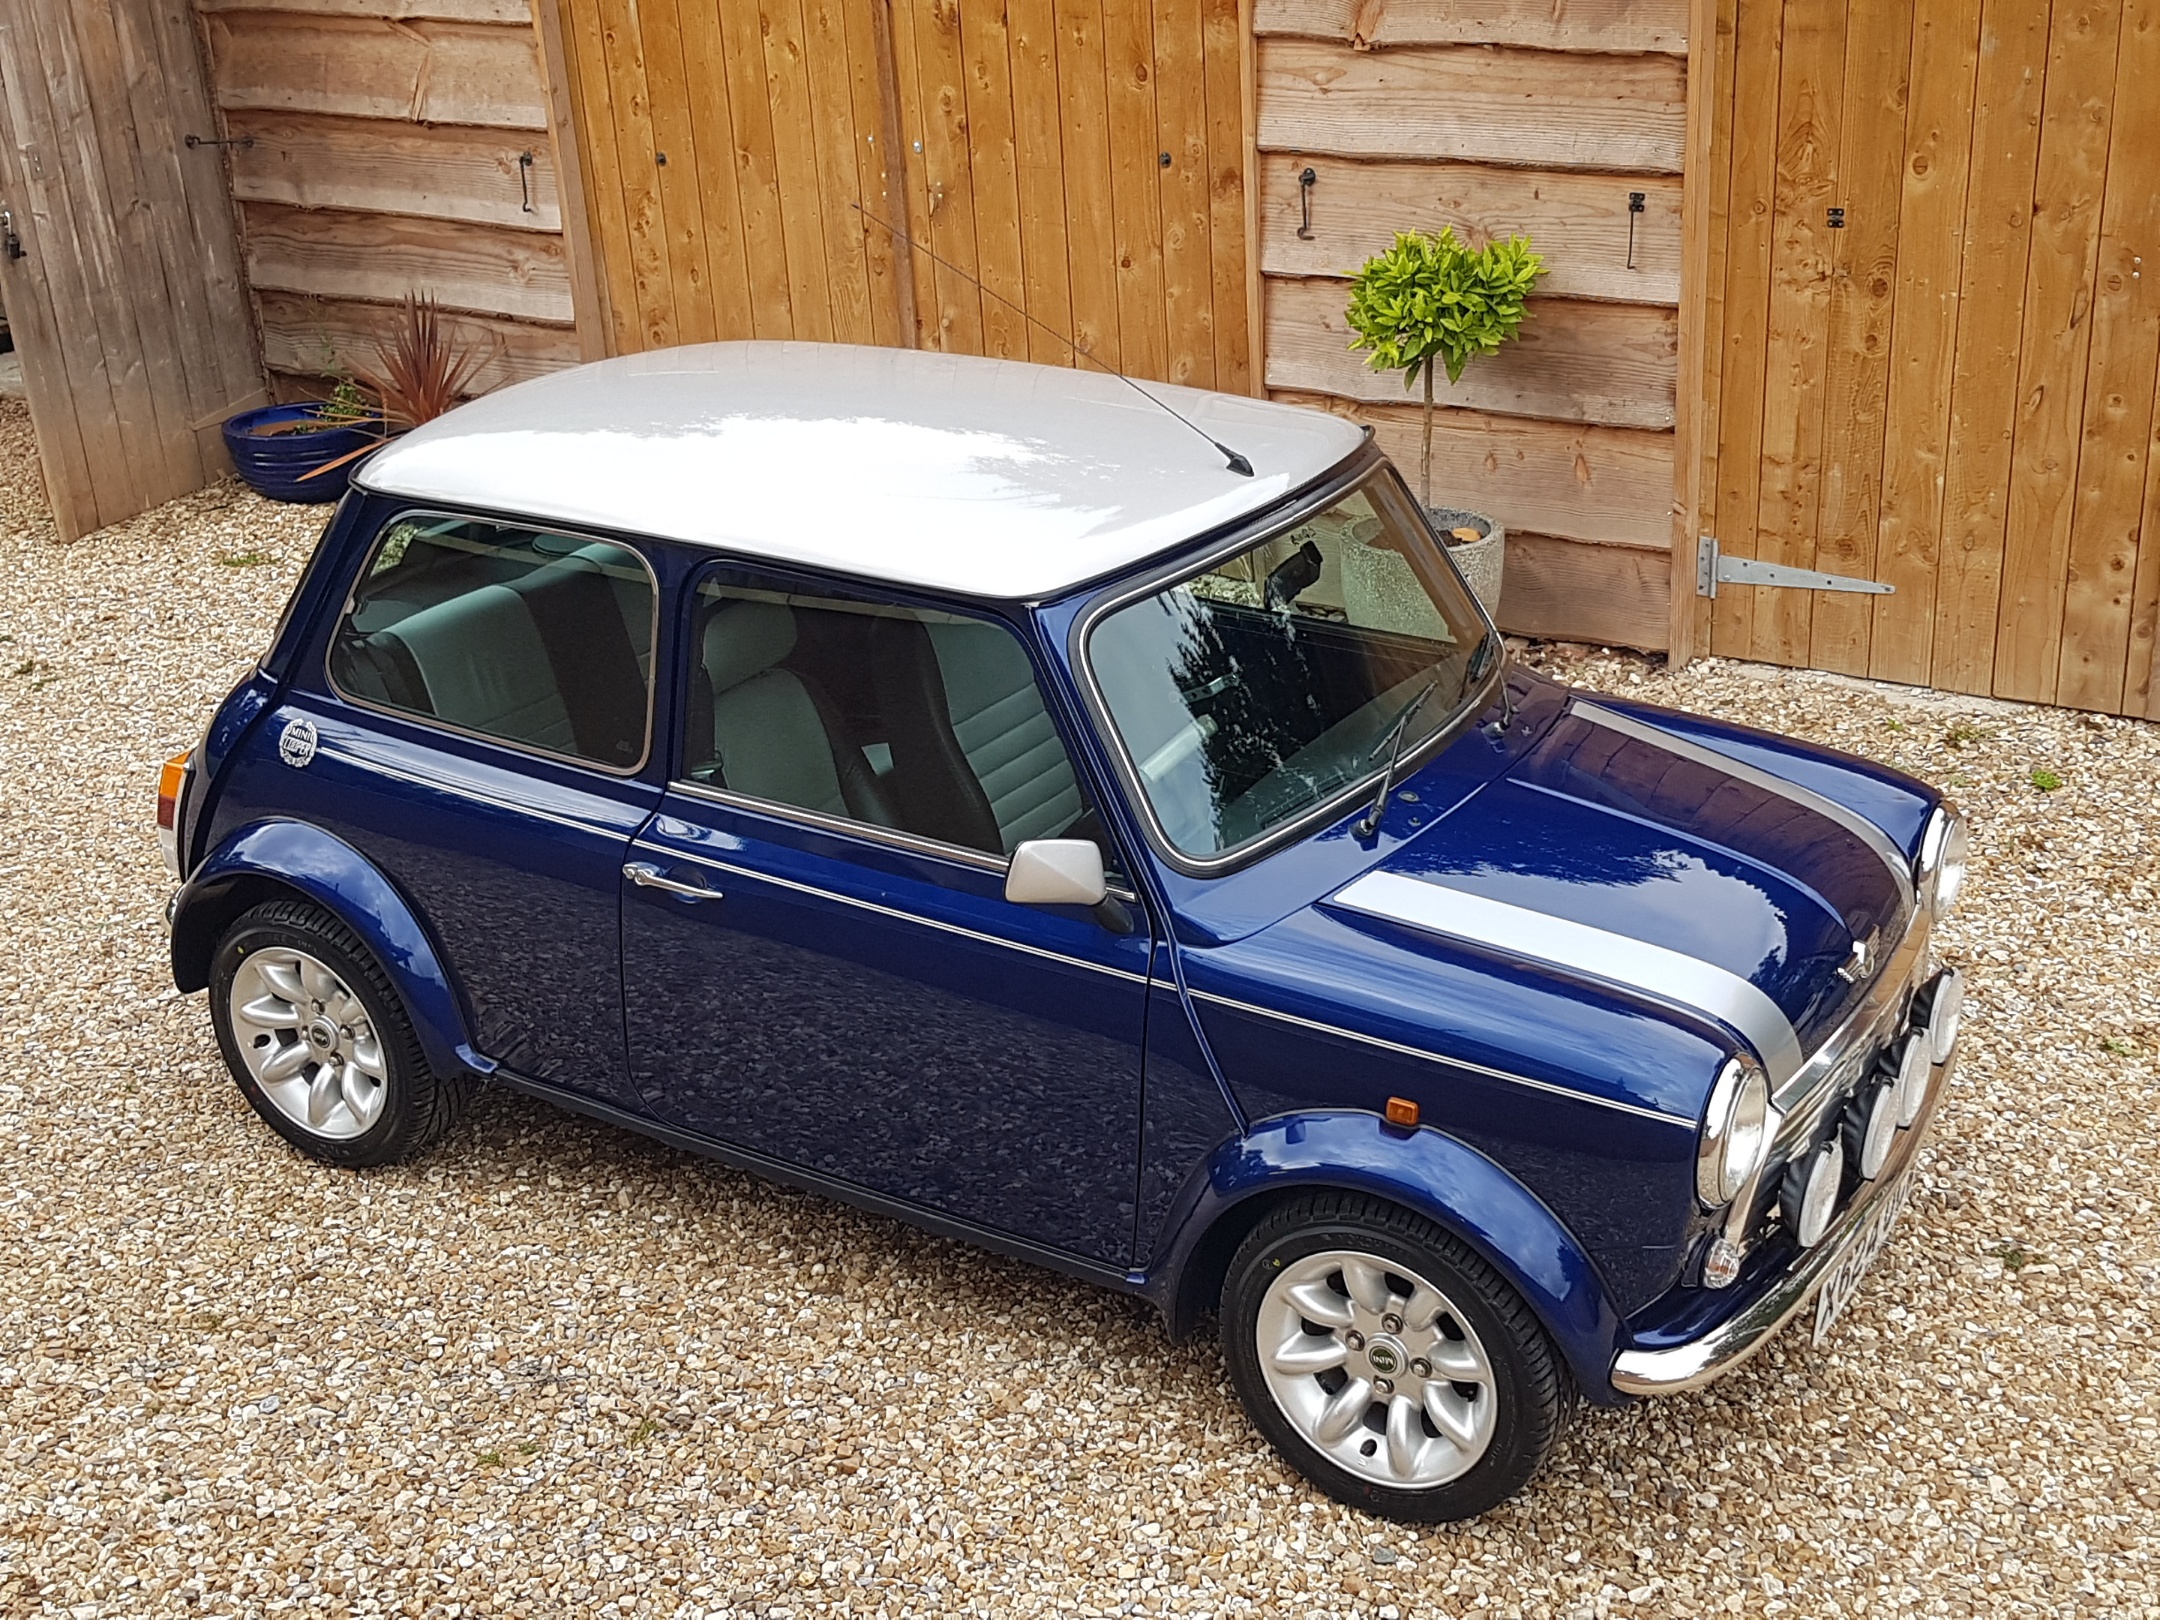 ** NOW SOLD ** 2000 Mini Cooper Sport On Just 9270 Miles From New!